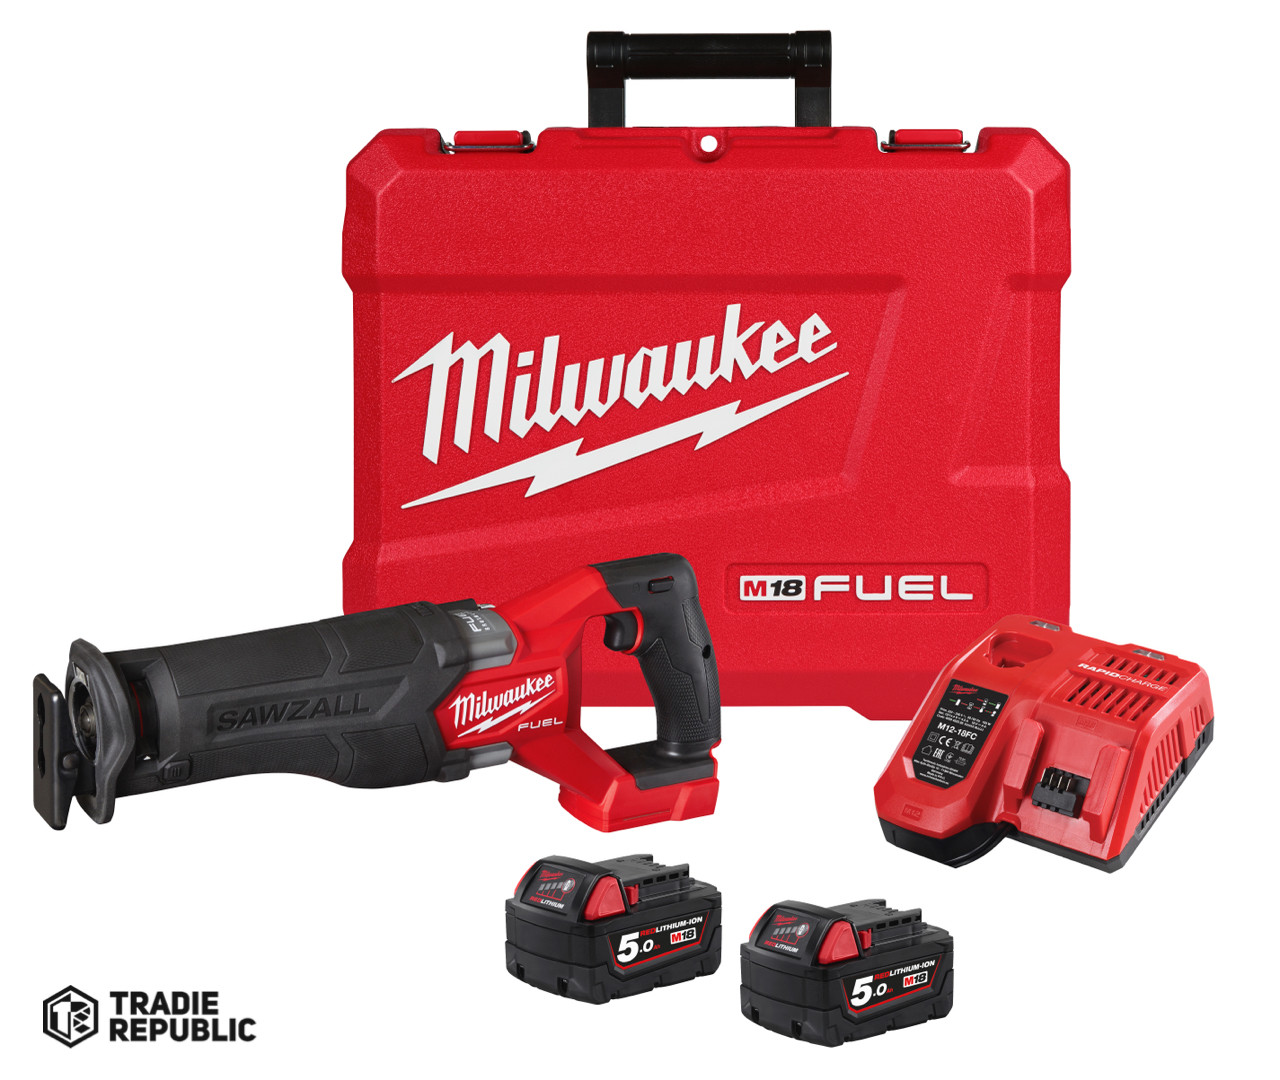 M18CSX2-502C Milwaukee M18 FUEL SAWZALL - KIT includes 2x5Ah batteries, rapid charger and case